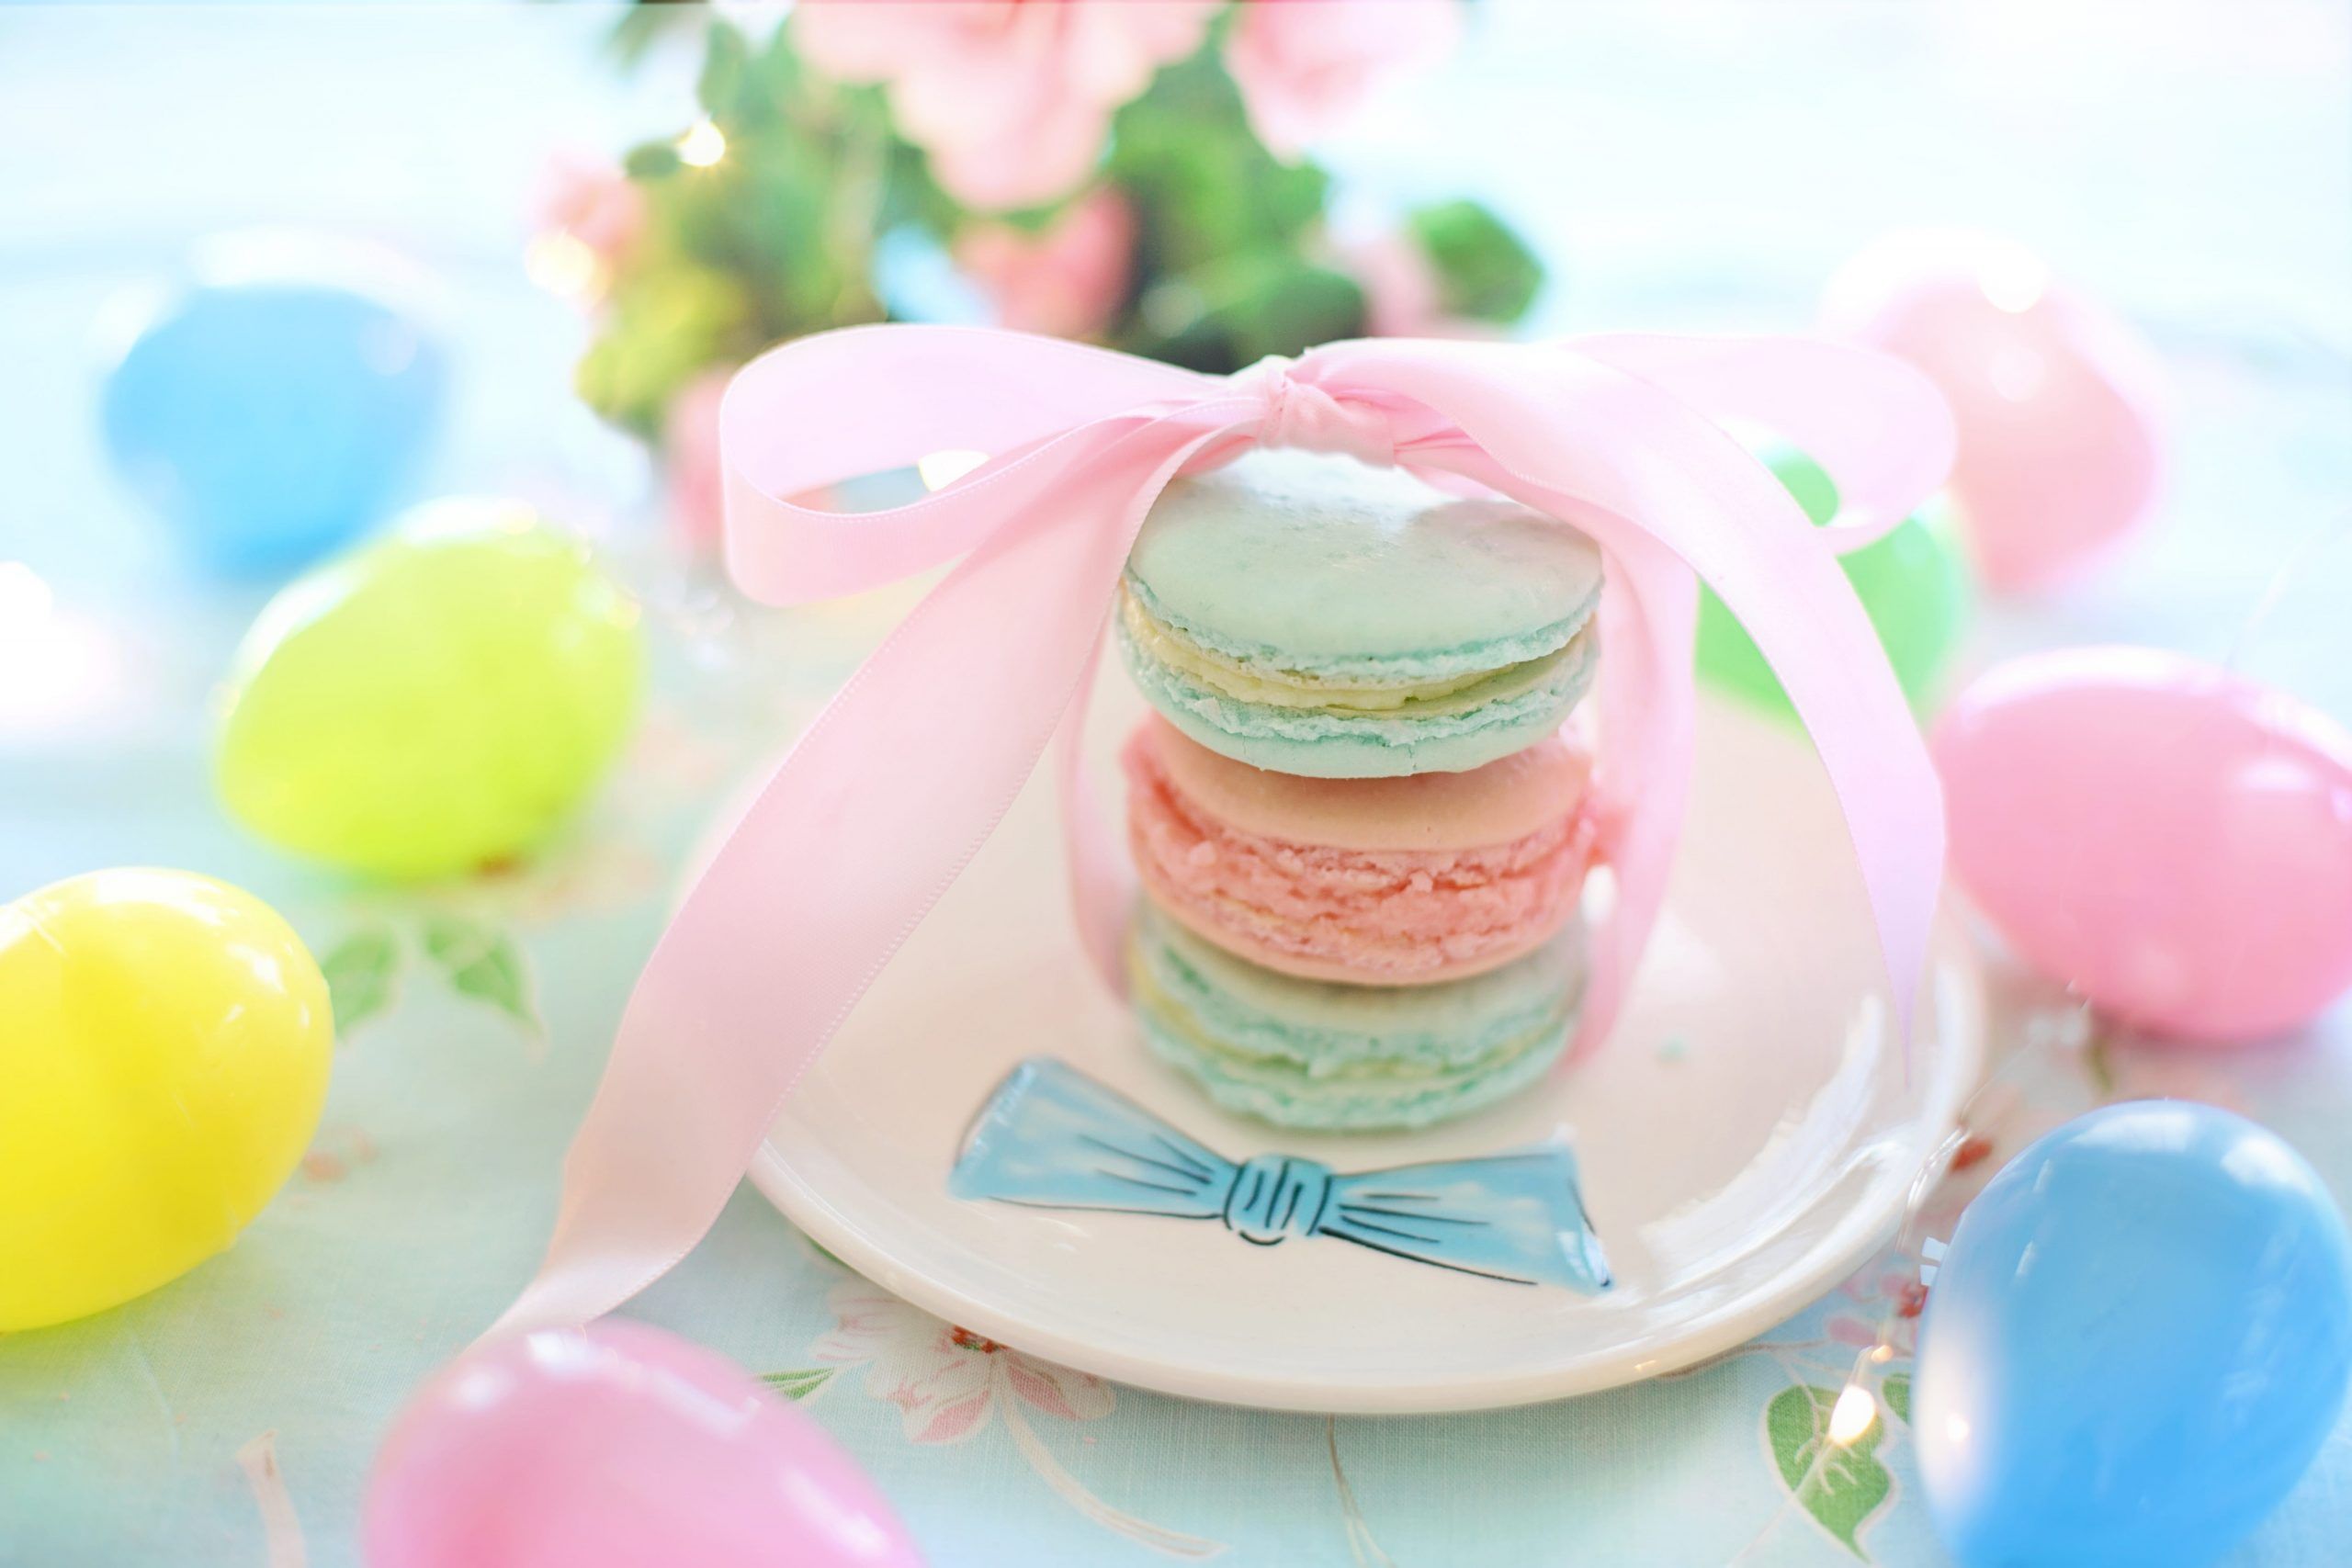 Easter wallpaper, macarons, pastels, cookies, biscuits, pastries, sweet food • Wallpaper For You HD Wallpaper For Desktop & Mobile